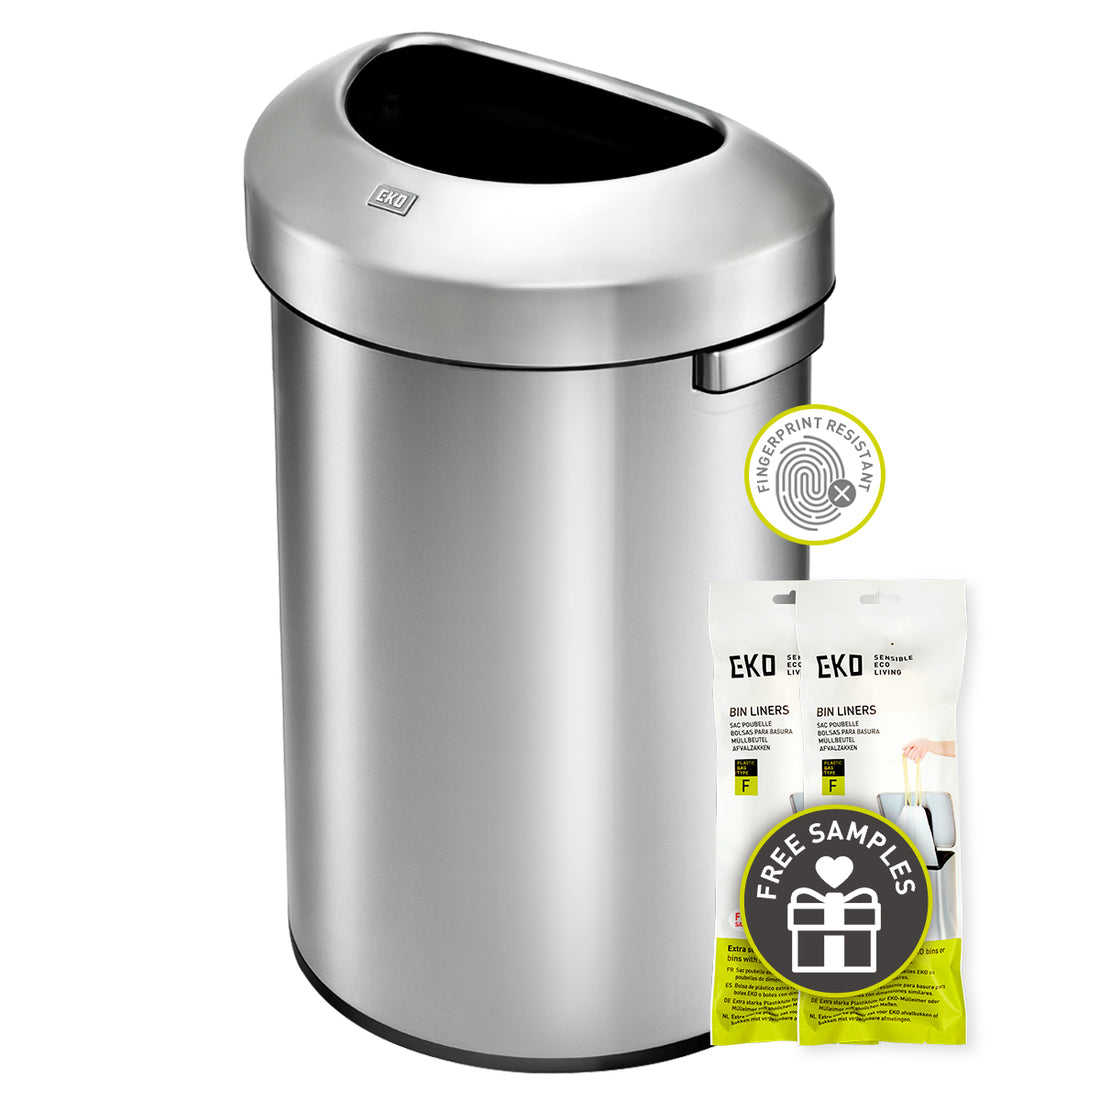 Eternal 15 Gallon Round Open Top Waste Bin, Tall Commercial Trash Can for